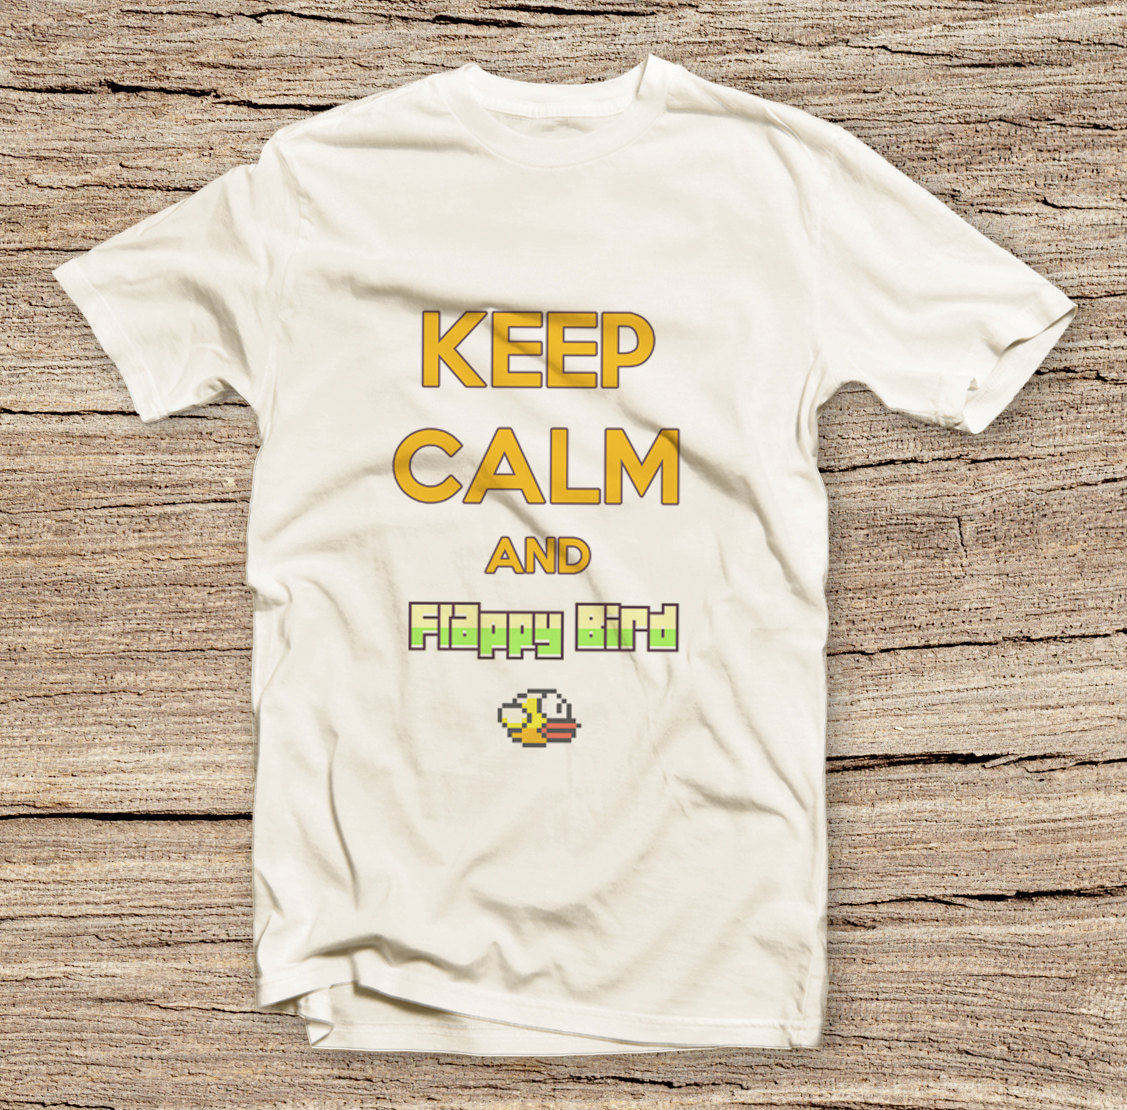 Pts-049 Flappy Bird Printed T-shirt, Famous Game, Flappy Bird Clothing, Keep Calm Shirts